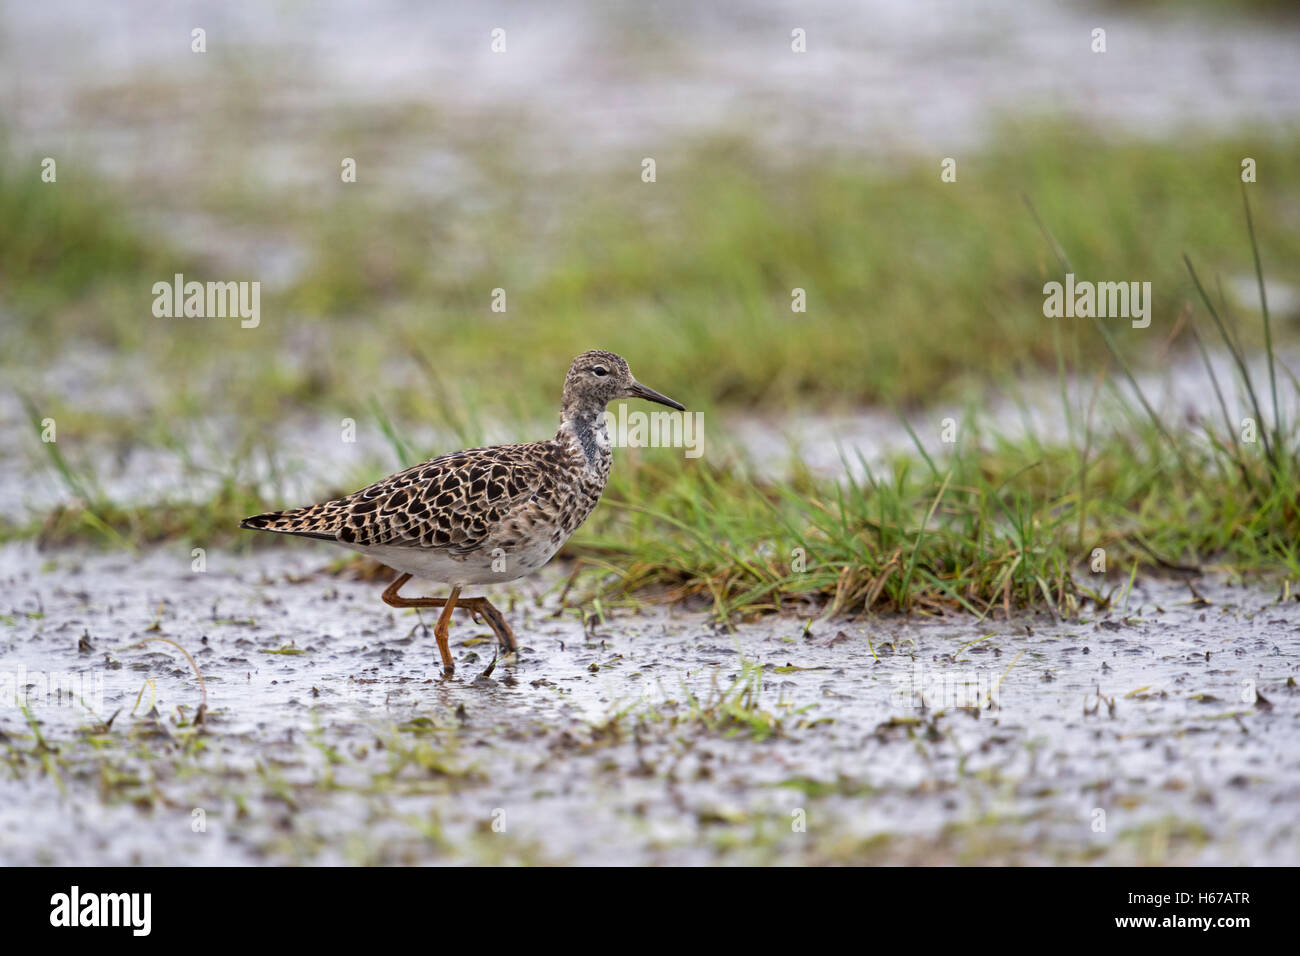 Ruff / Kampflaeufer ( Philomachus pugnax ), resting on wet grassland during spring migration, searching for food, Middle Europe. Stock Photo